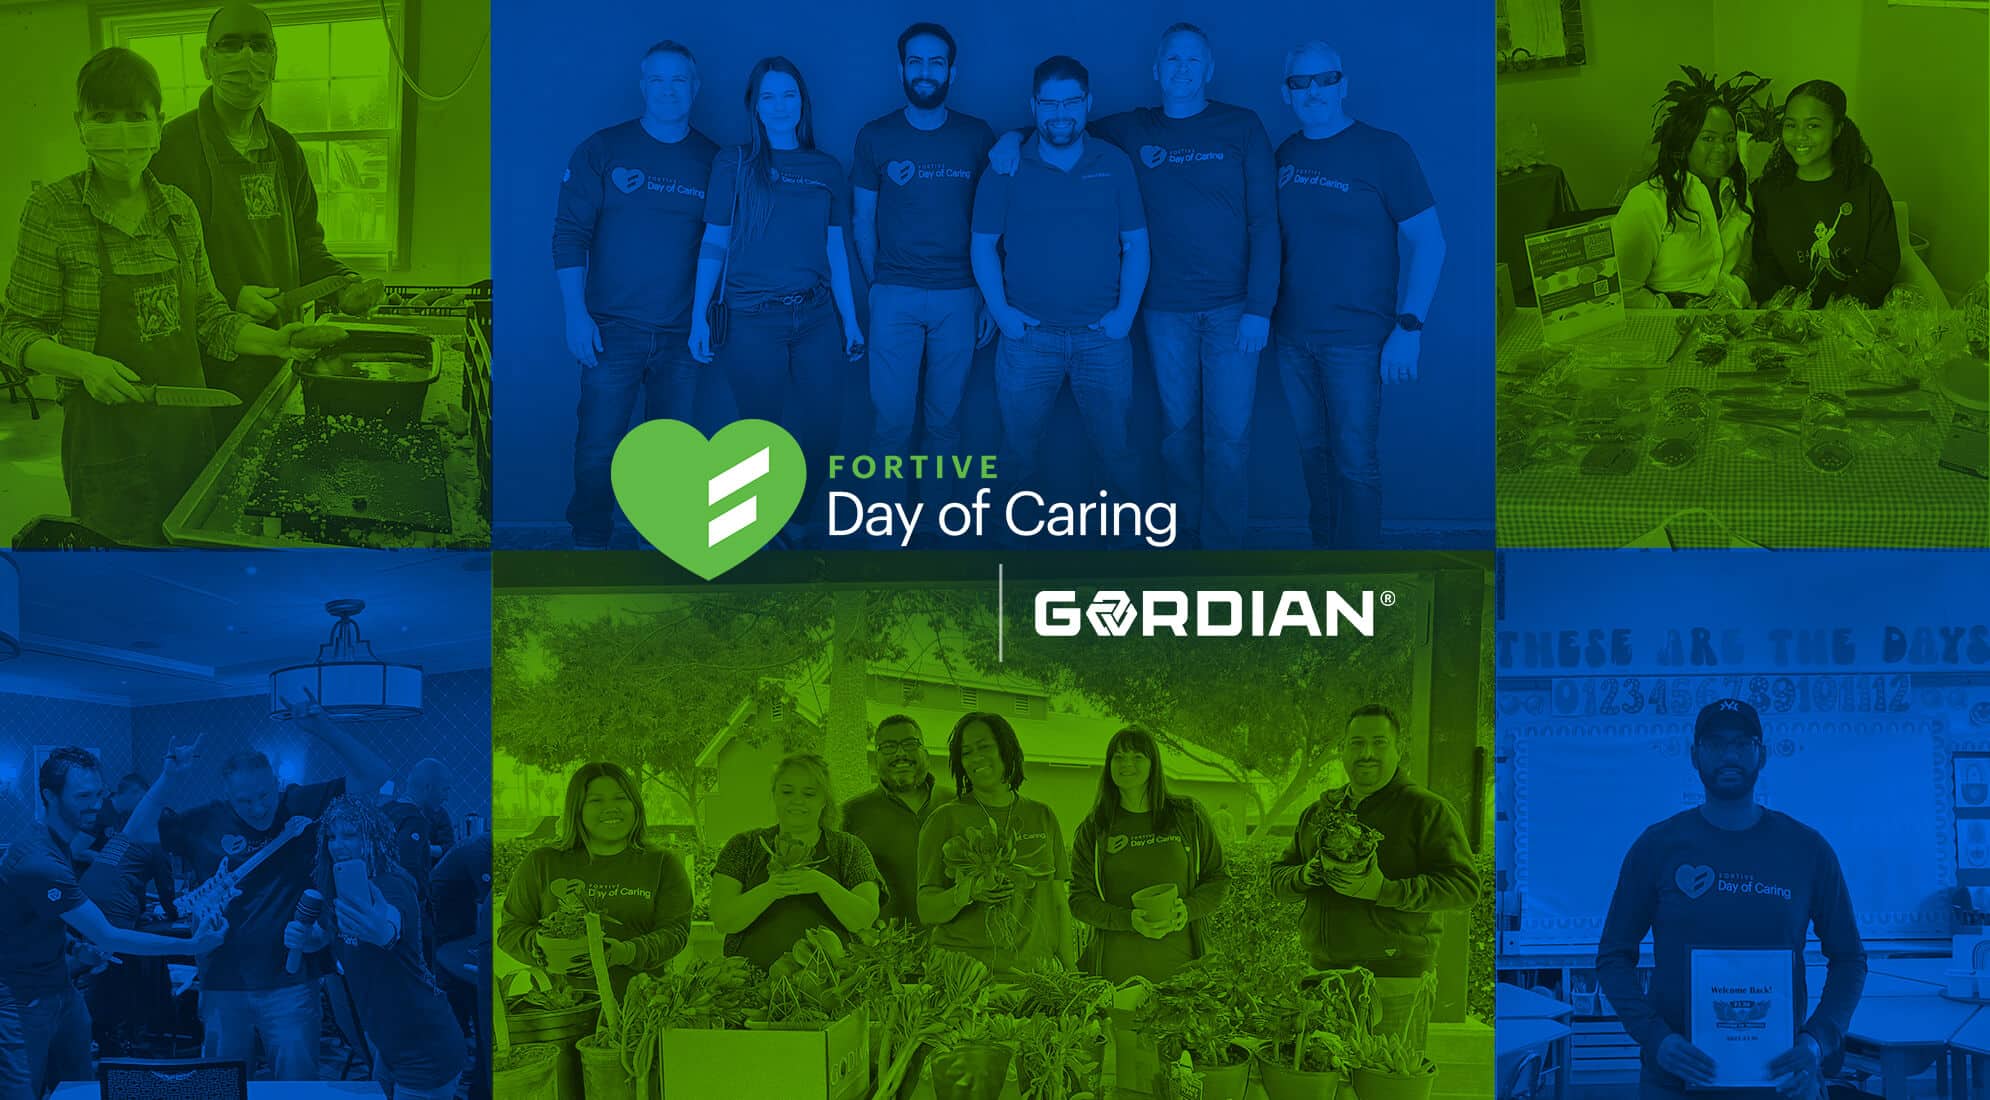 Gordian Gives Throughout 2022 Fortive Day of Caring